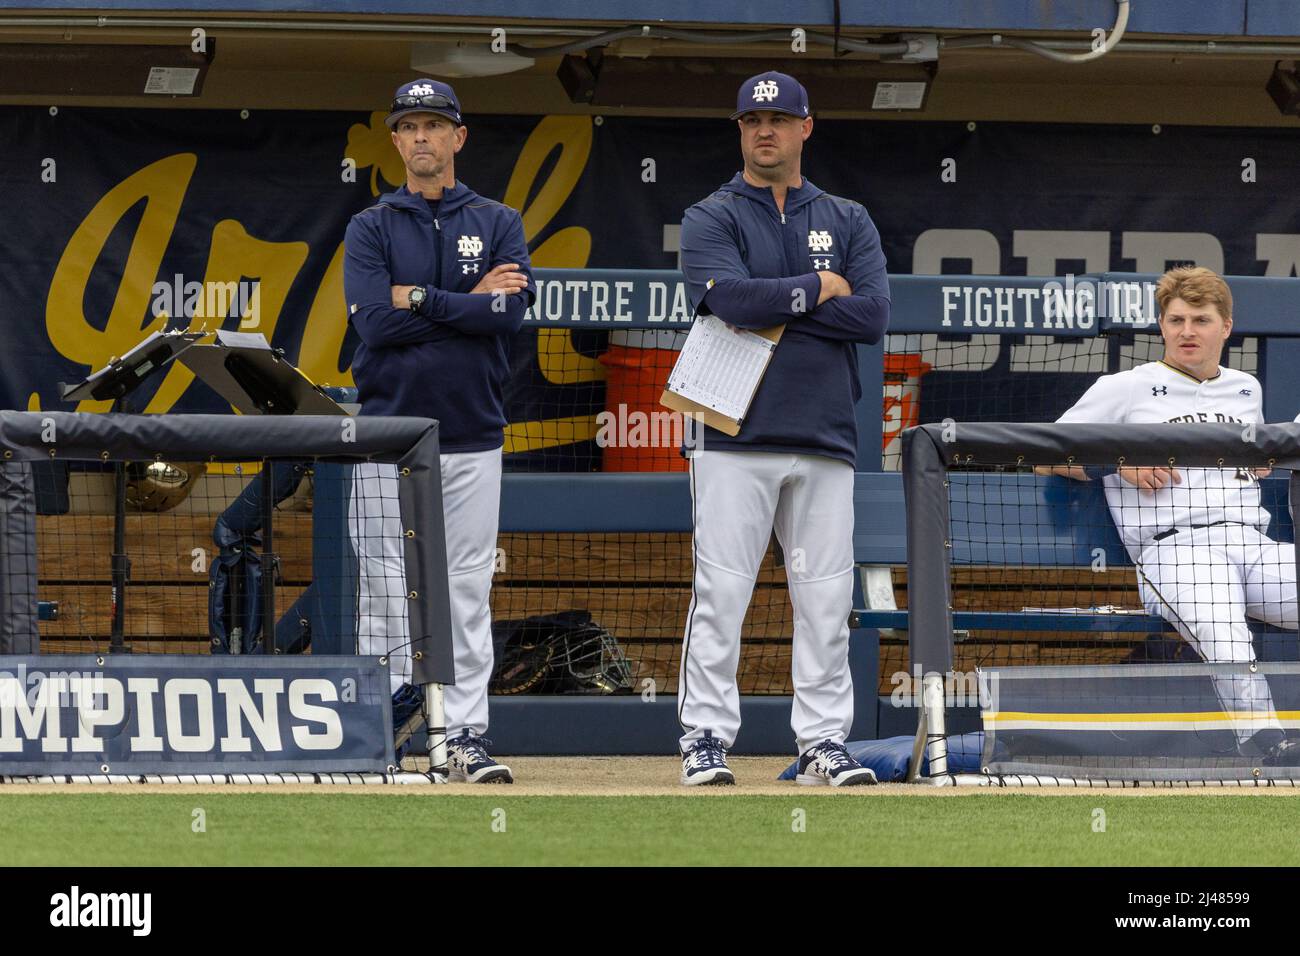 April 12, 2022: Notre Dame head coach Link Jarrett watches on from the  dugout during NCAA Baseball game action between the Michigan Wolverines and  the Notre Dame Fighting Irish at Frank Eck